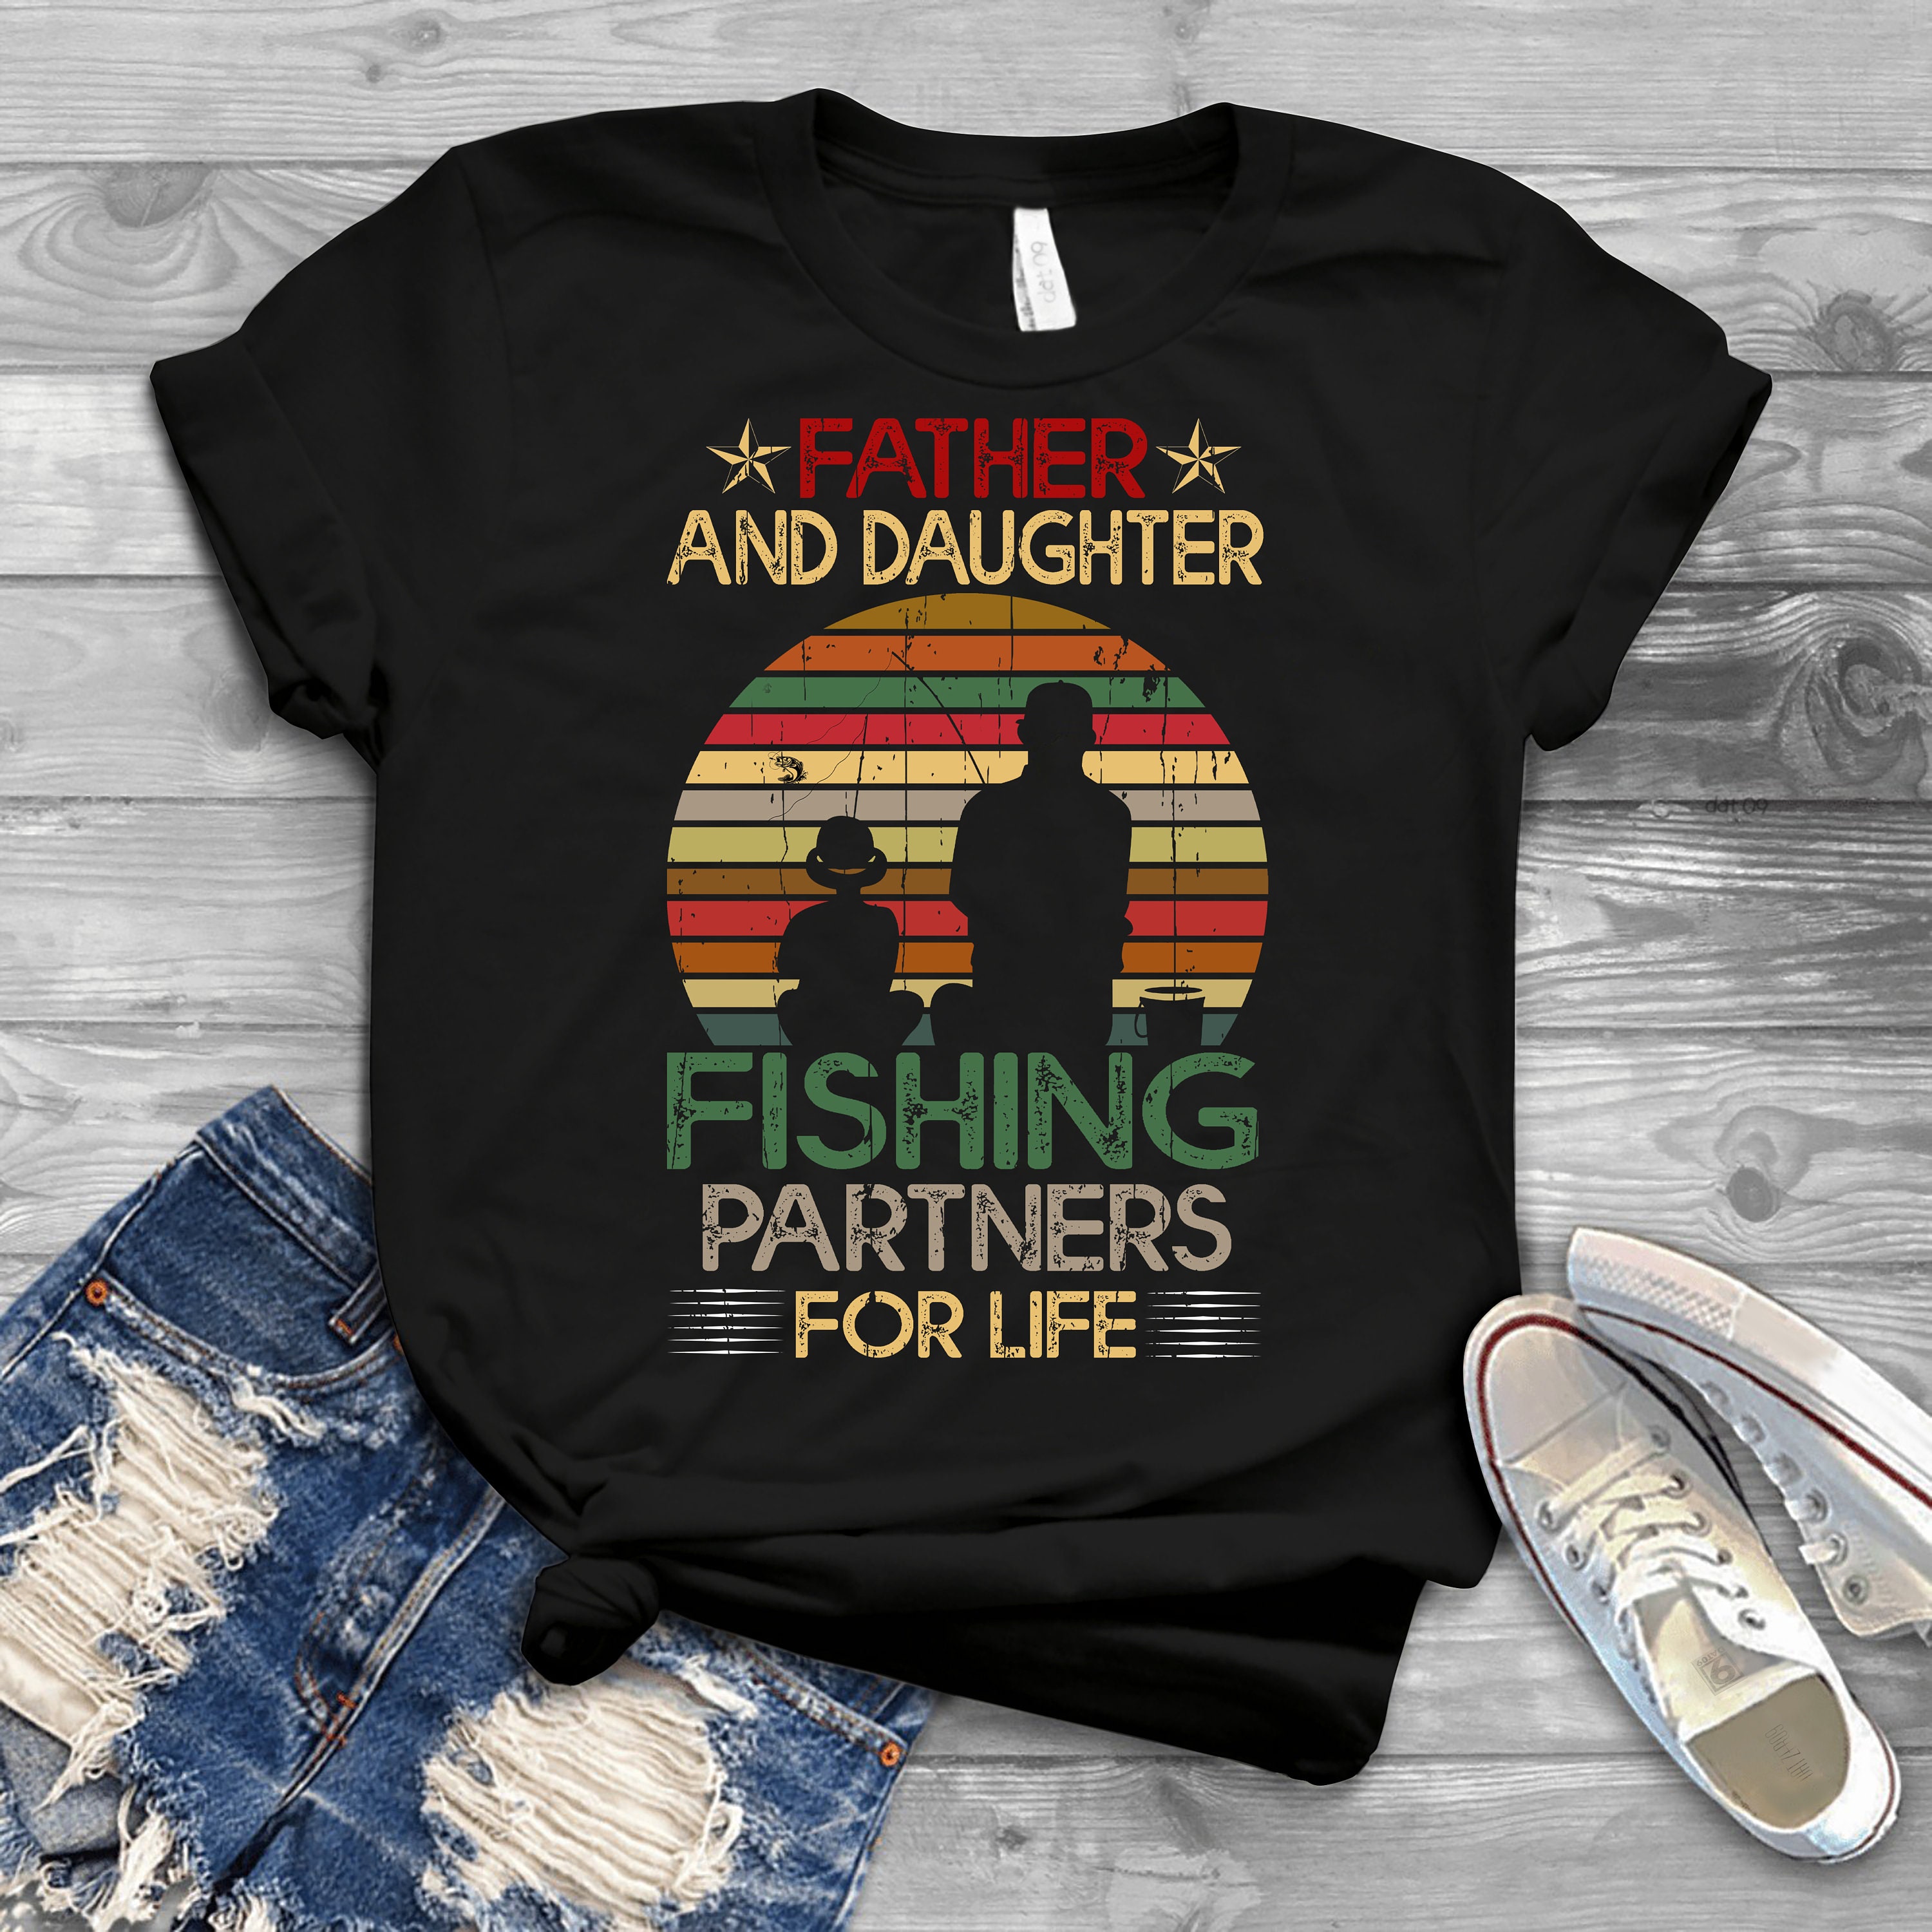 Mens Fisherman Dad and Daughter Fishing Partners Father's Day Shirts Men,  Birthday T Shirts, Summer Tops, Beach T Shirts -  Canada